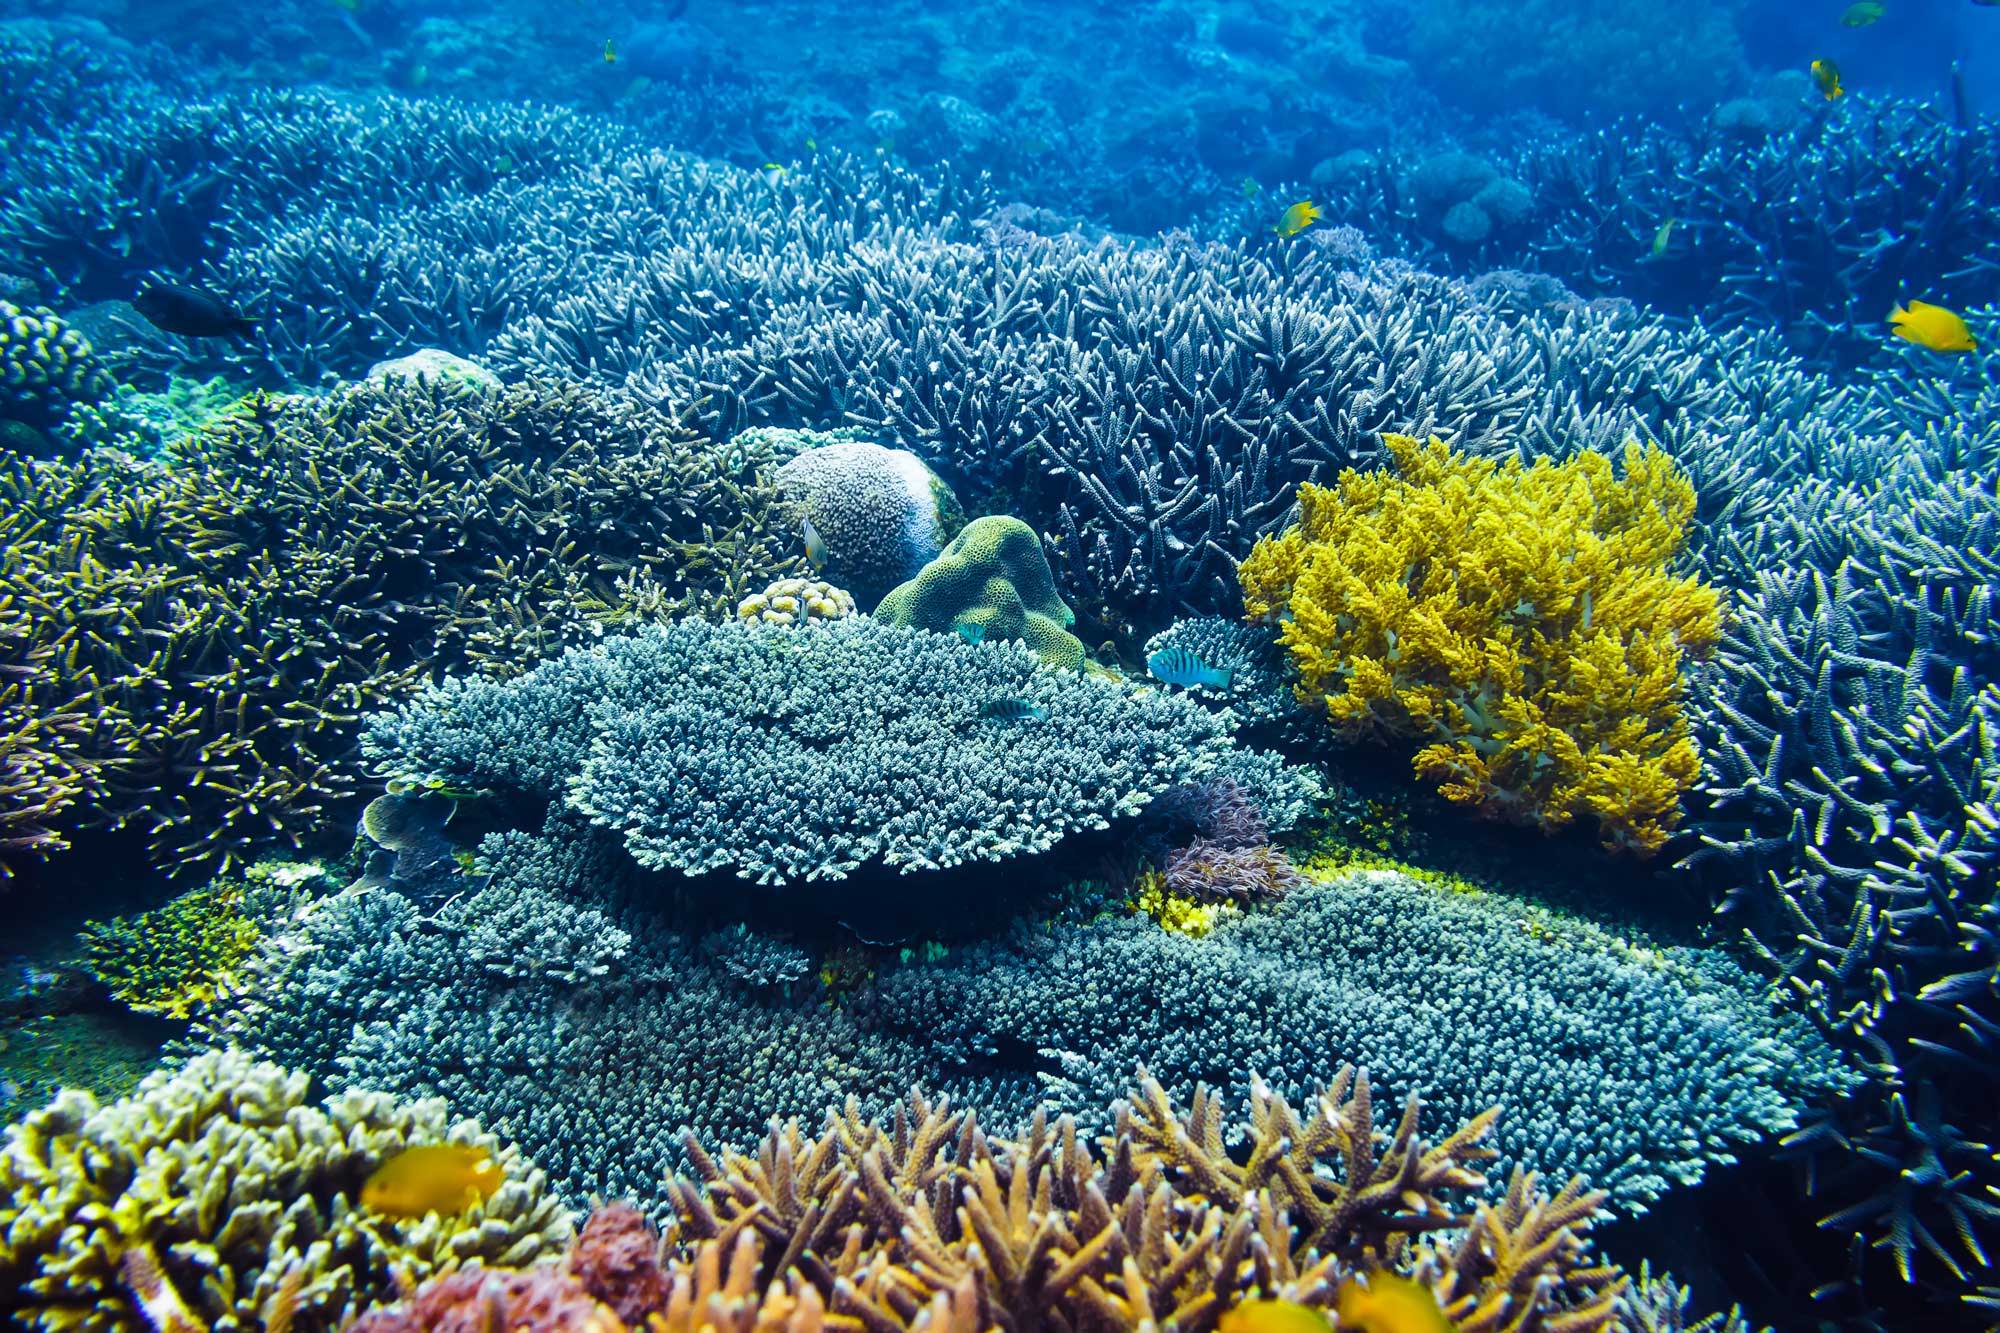 Why are coral reefs important for the planet?